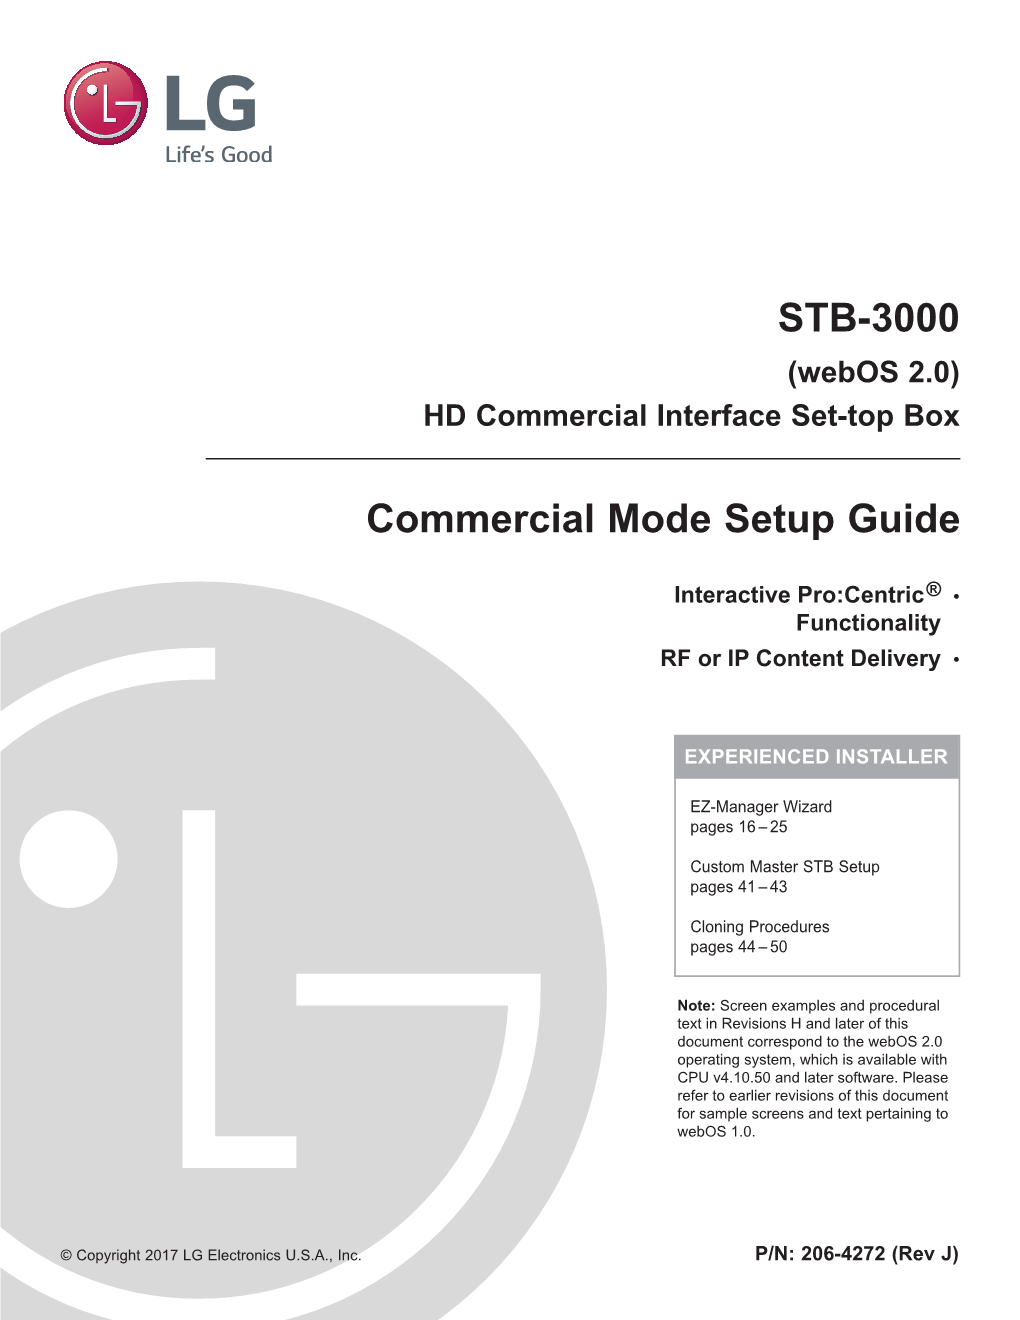 STB-3000 Commercial Mode Setup Guide